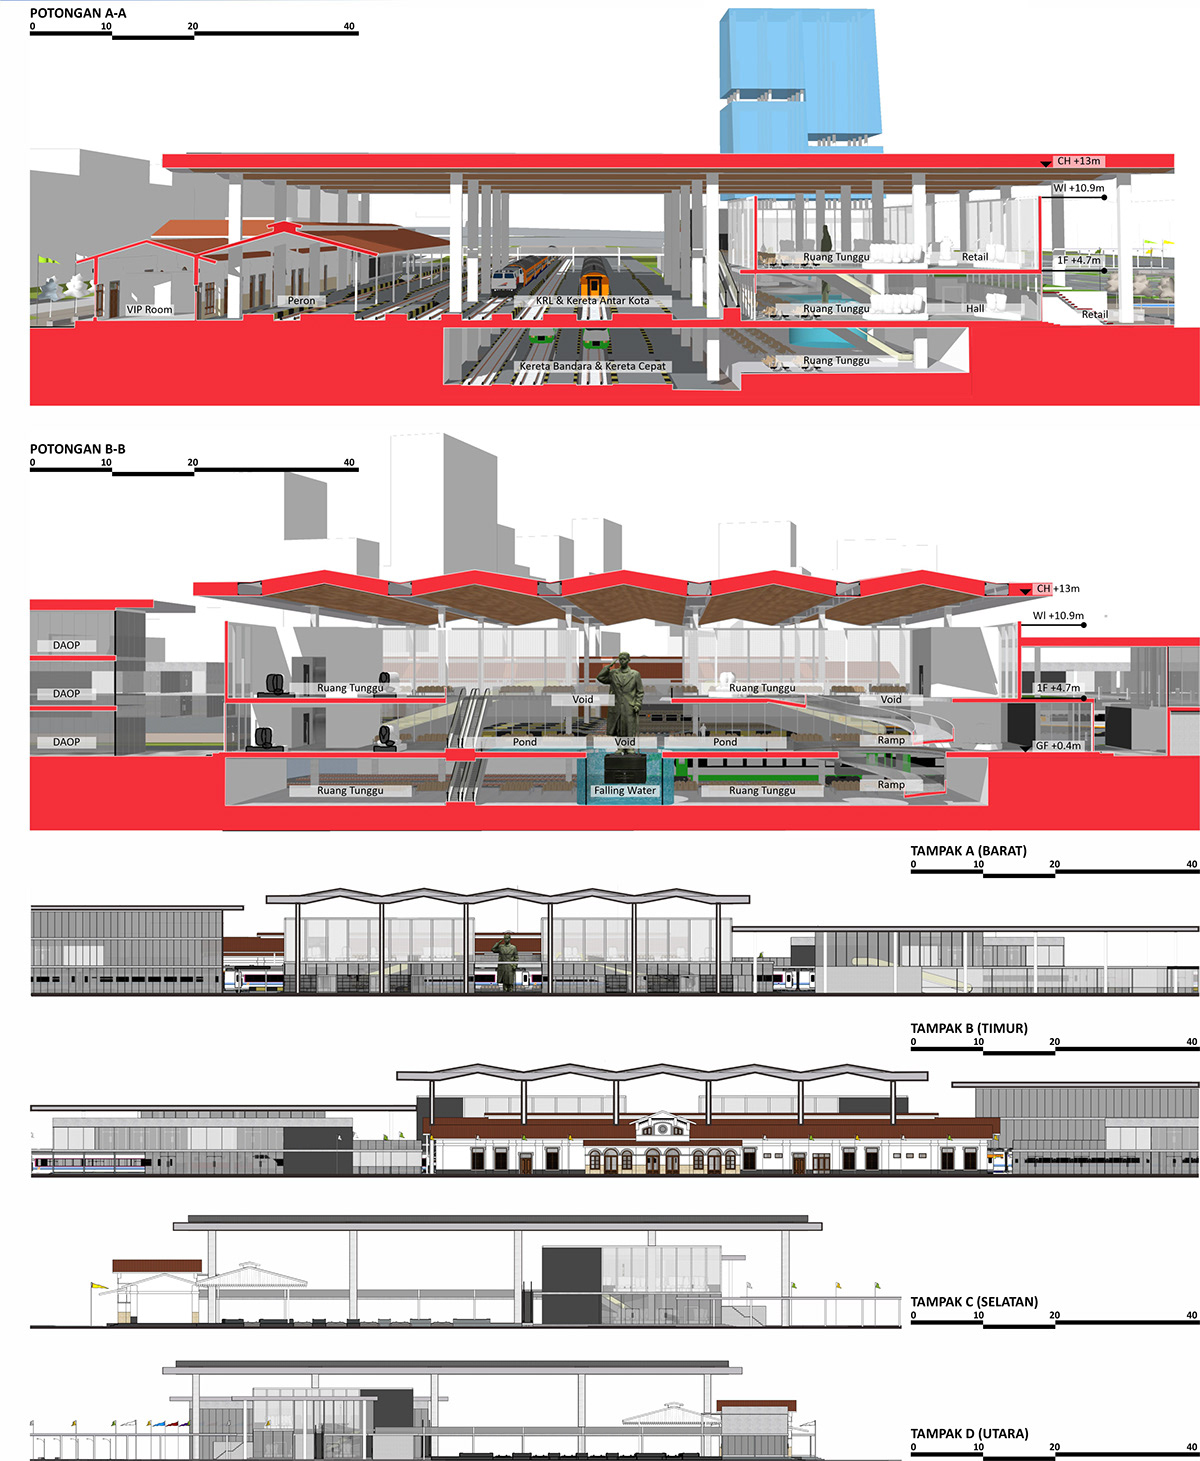 architecture Heritage Building heritage adaptive reuse indonesia lixil architecture competition Render visualization 3D